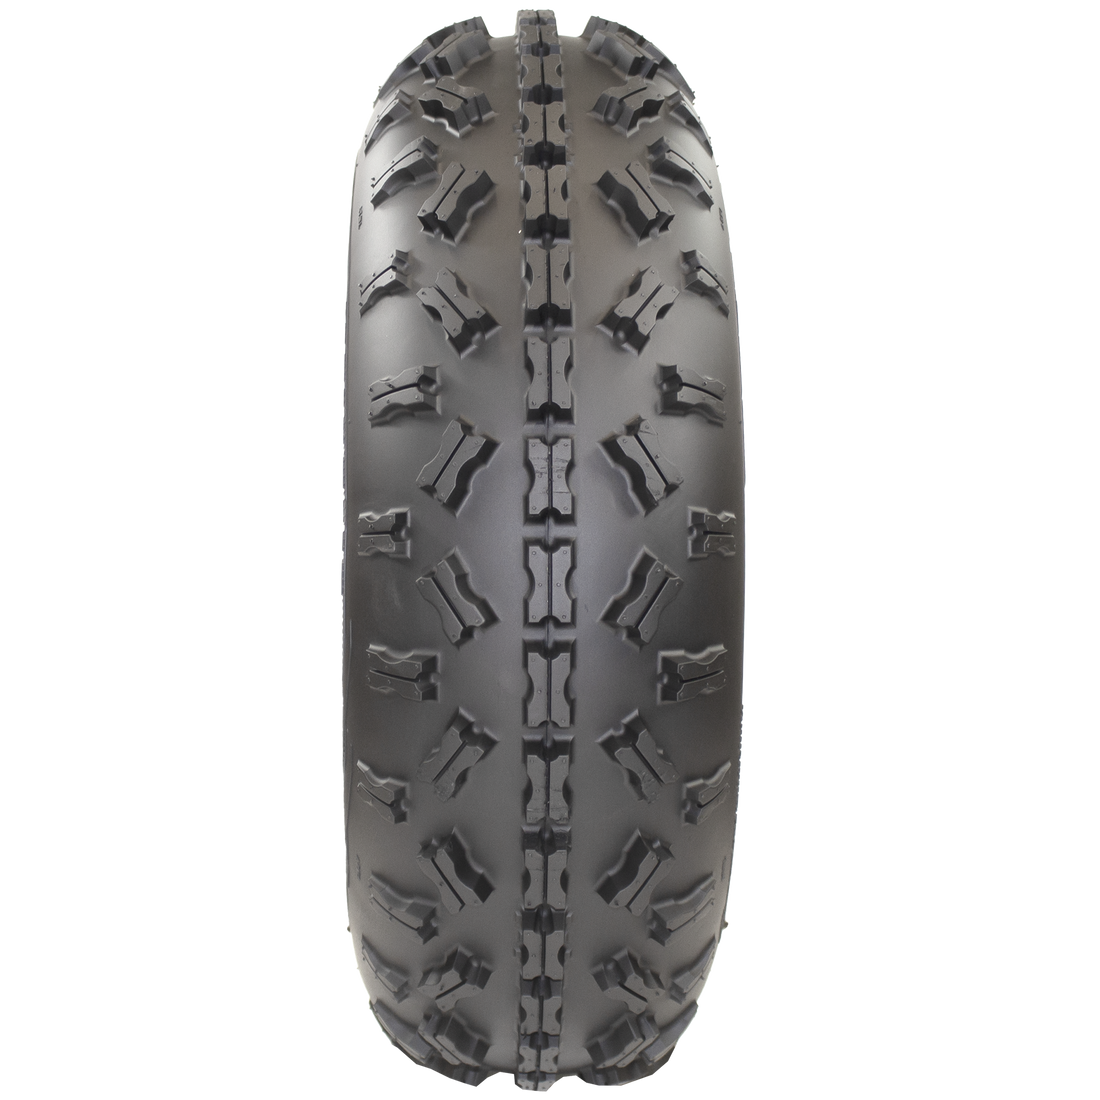 Full frontal view of Ground Buster 3 ATV Front tire, emphasizing its non-directional, sipped X-knob tread pattern. This design enhances flex and provides the edge needed for competitive racing on intermediate to hard terrains.